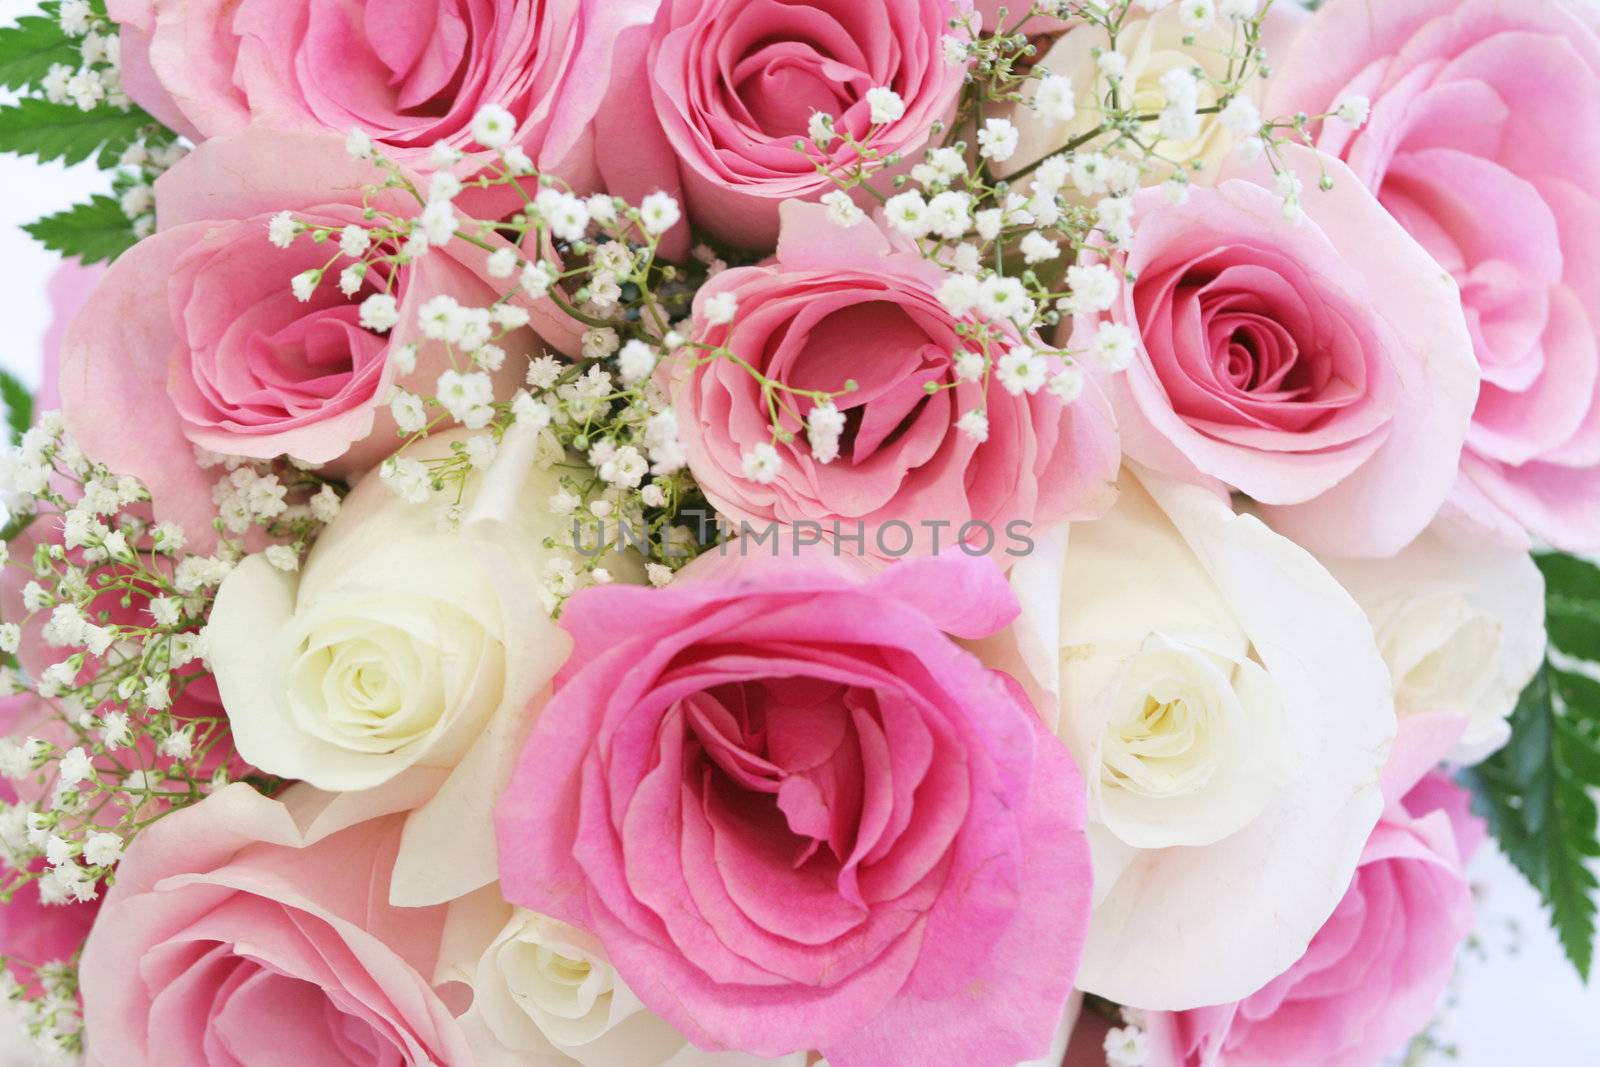 Bright and spunky pink and white roses